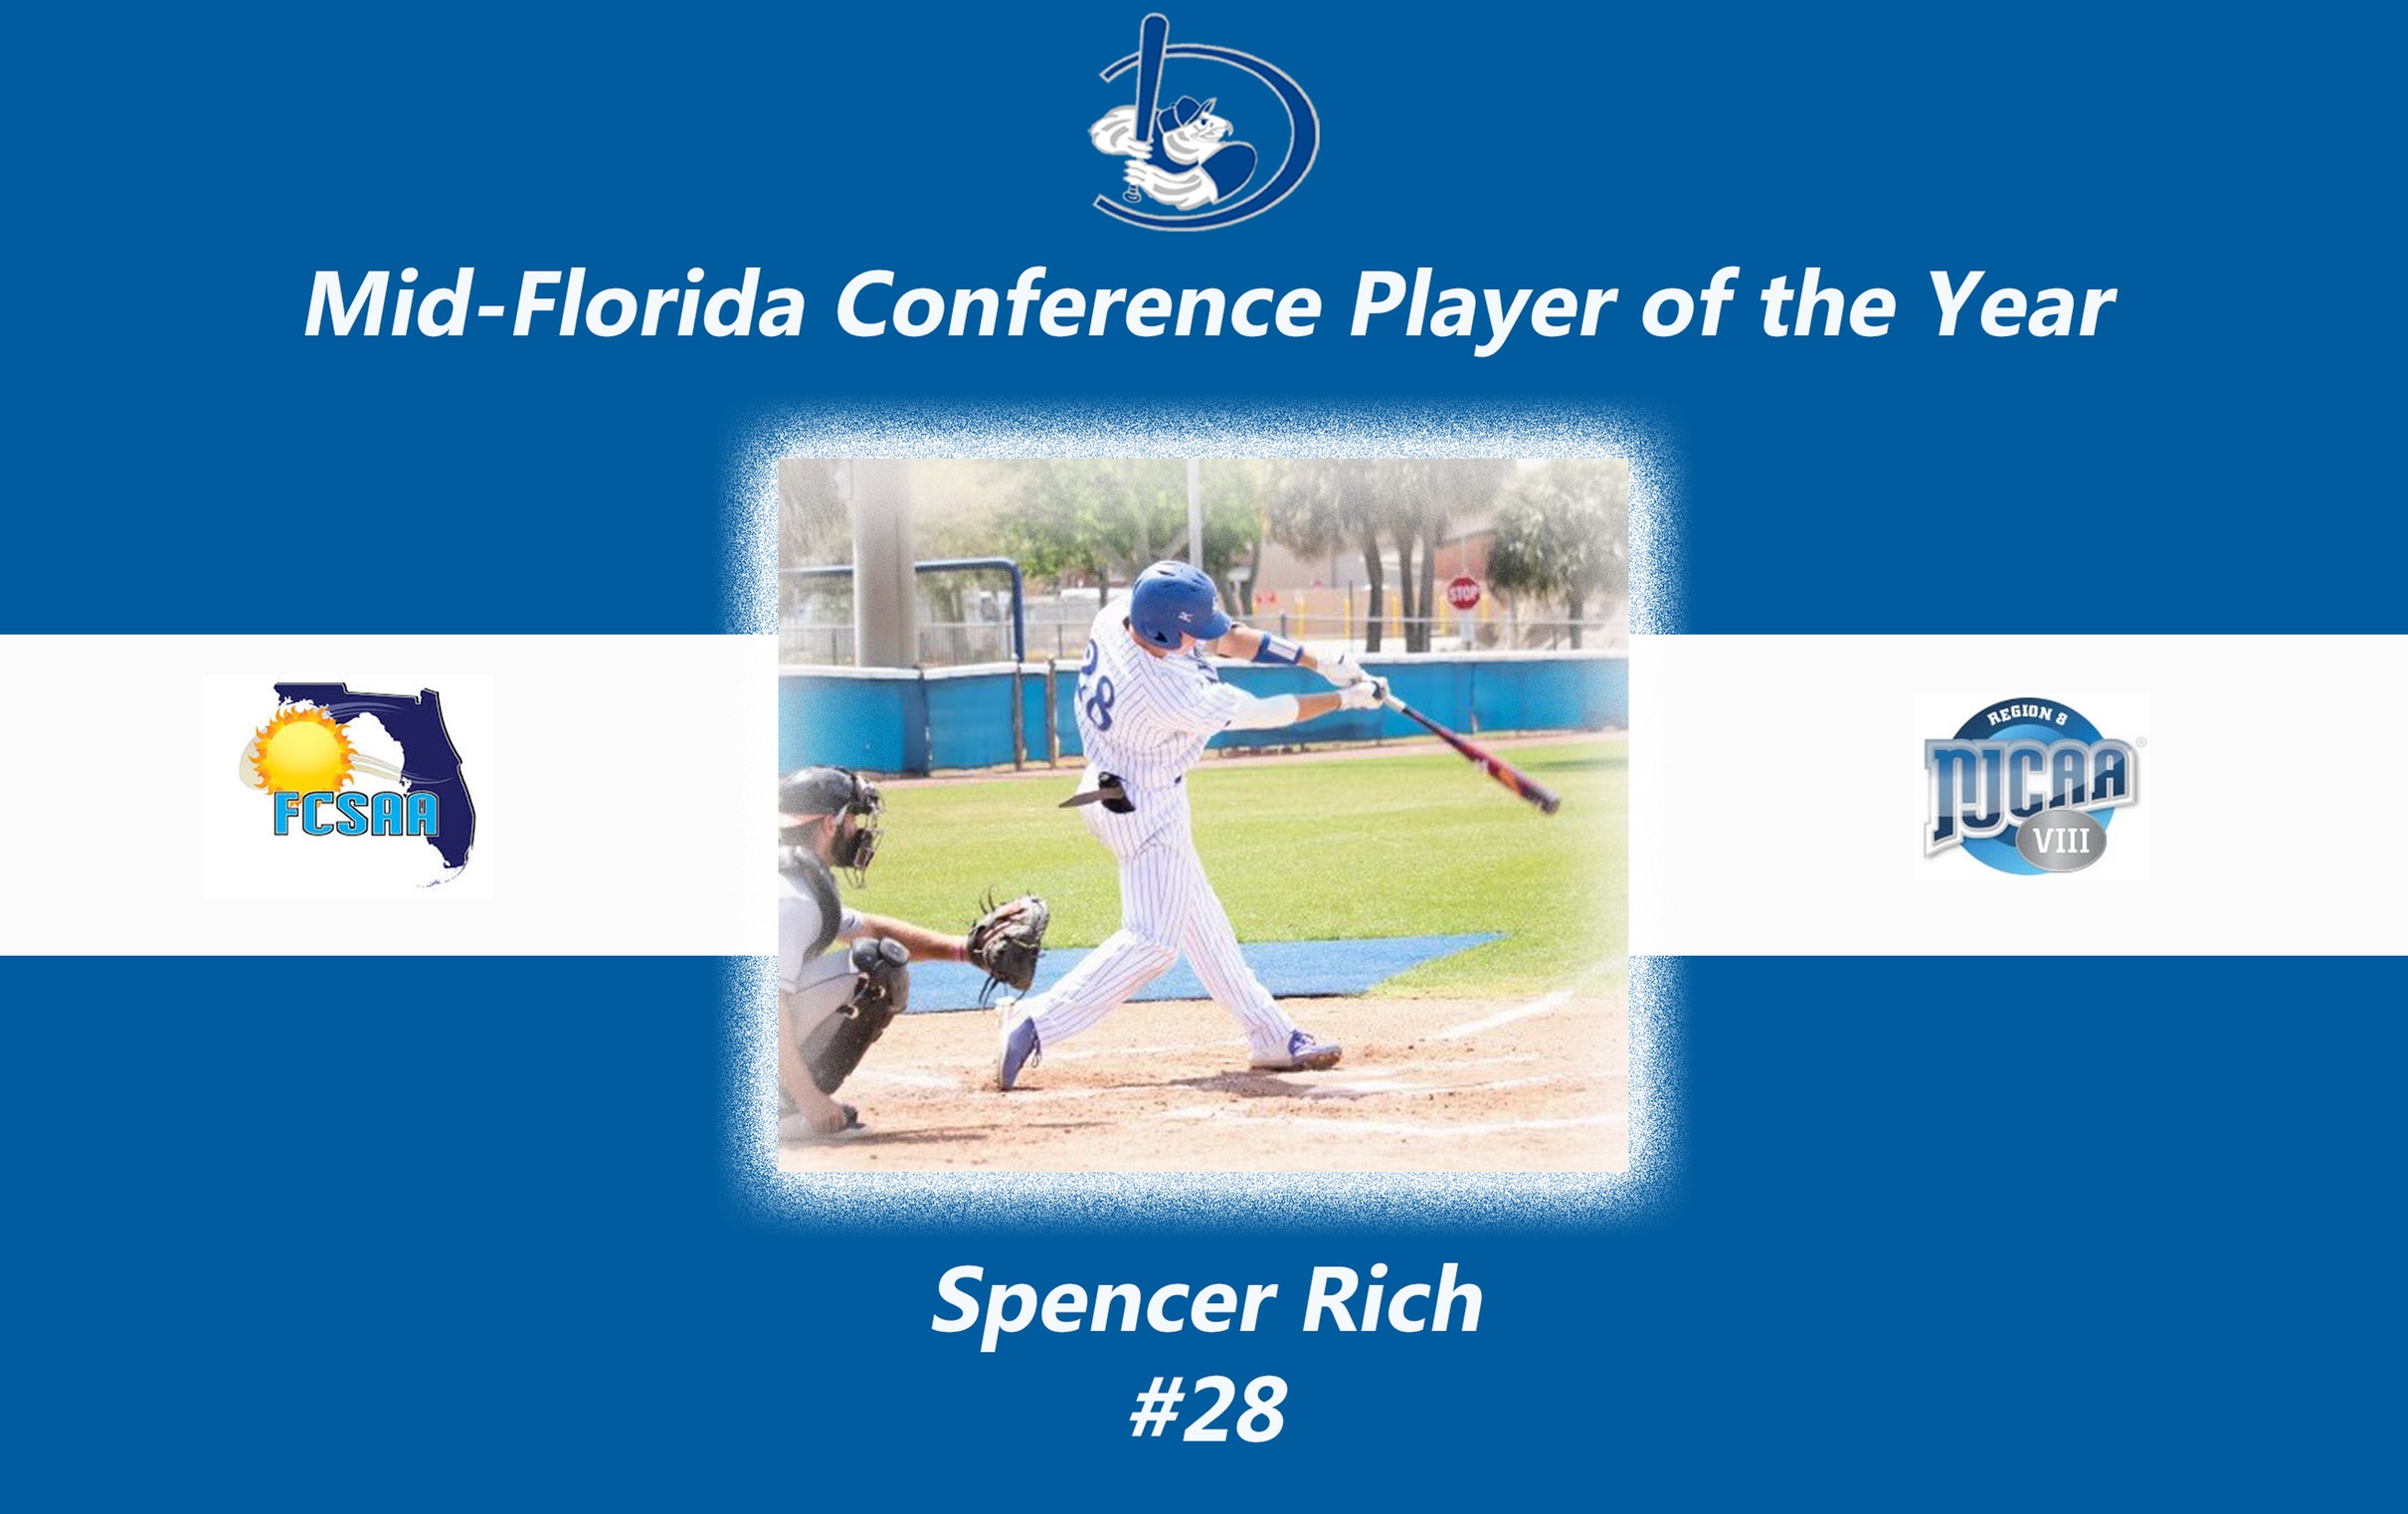 Spencer Rich Named Mid-Florida Conference Player of the Year